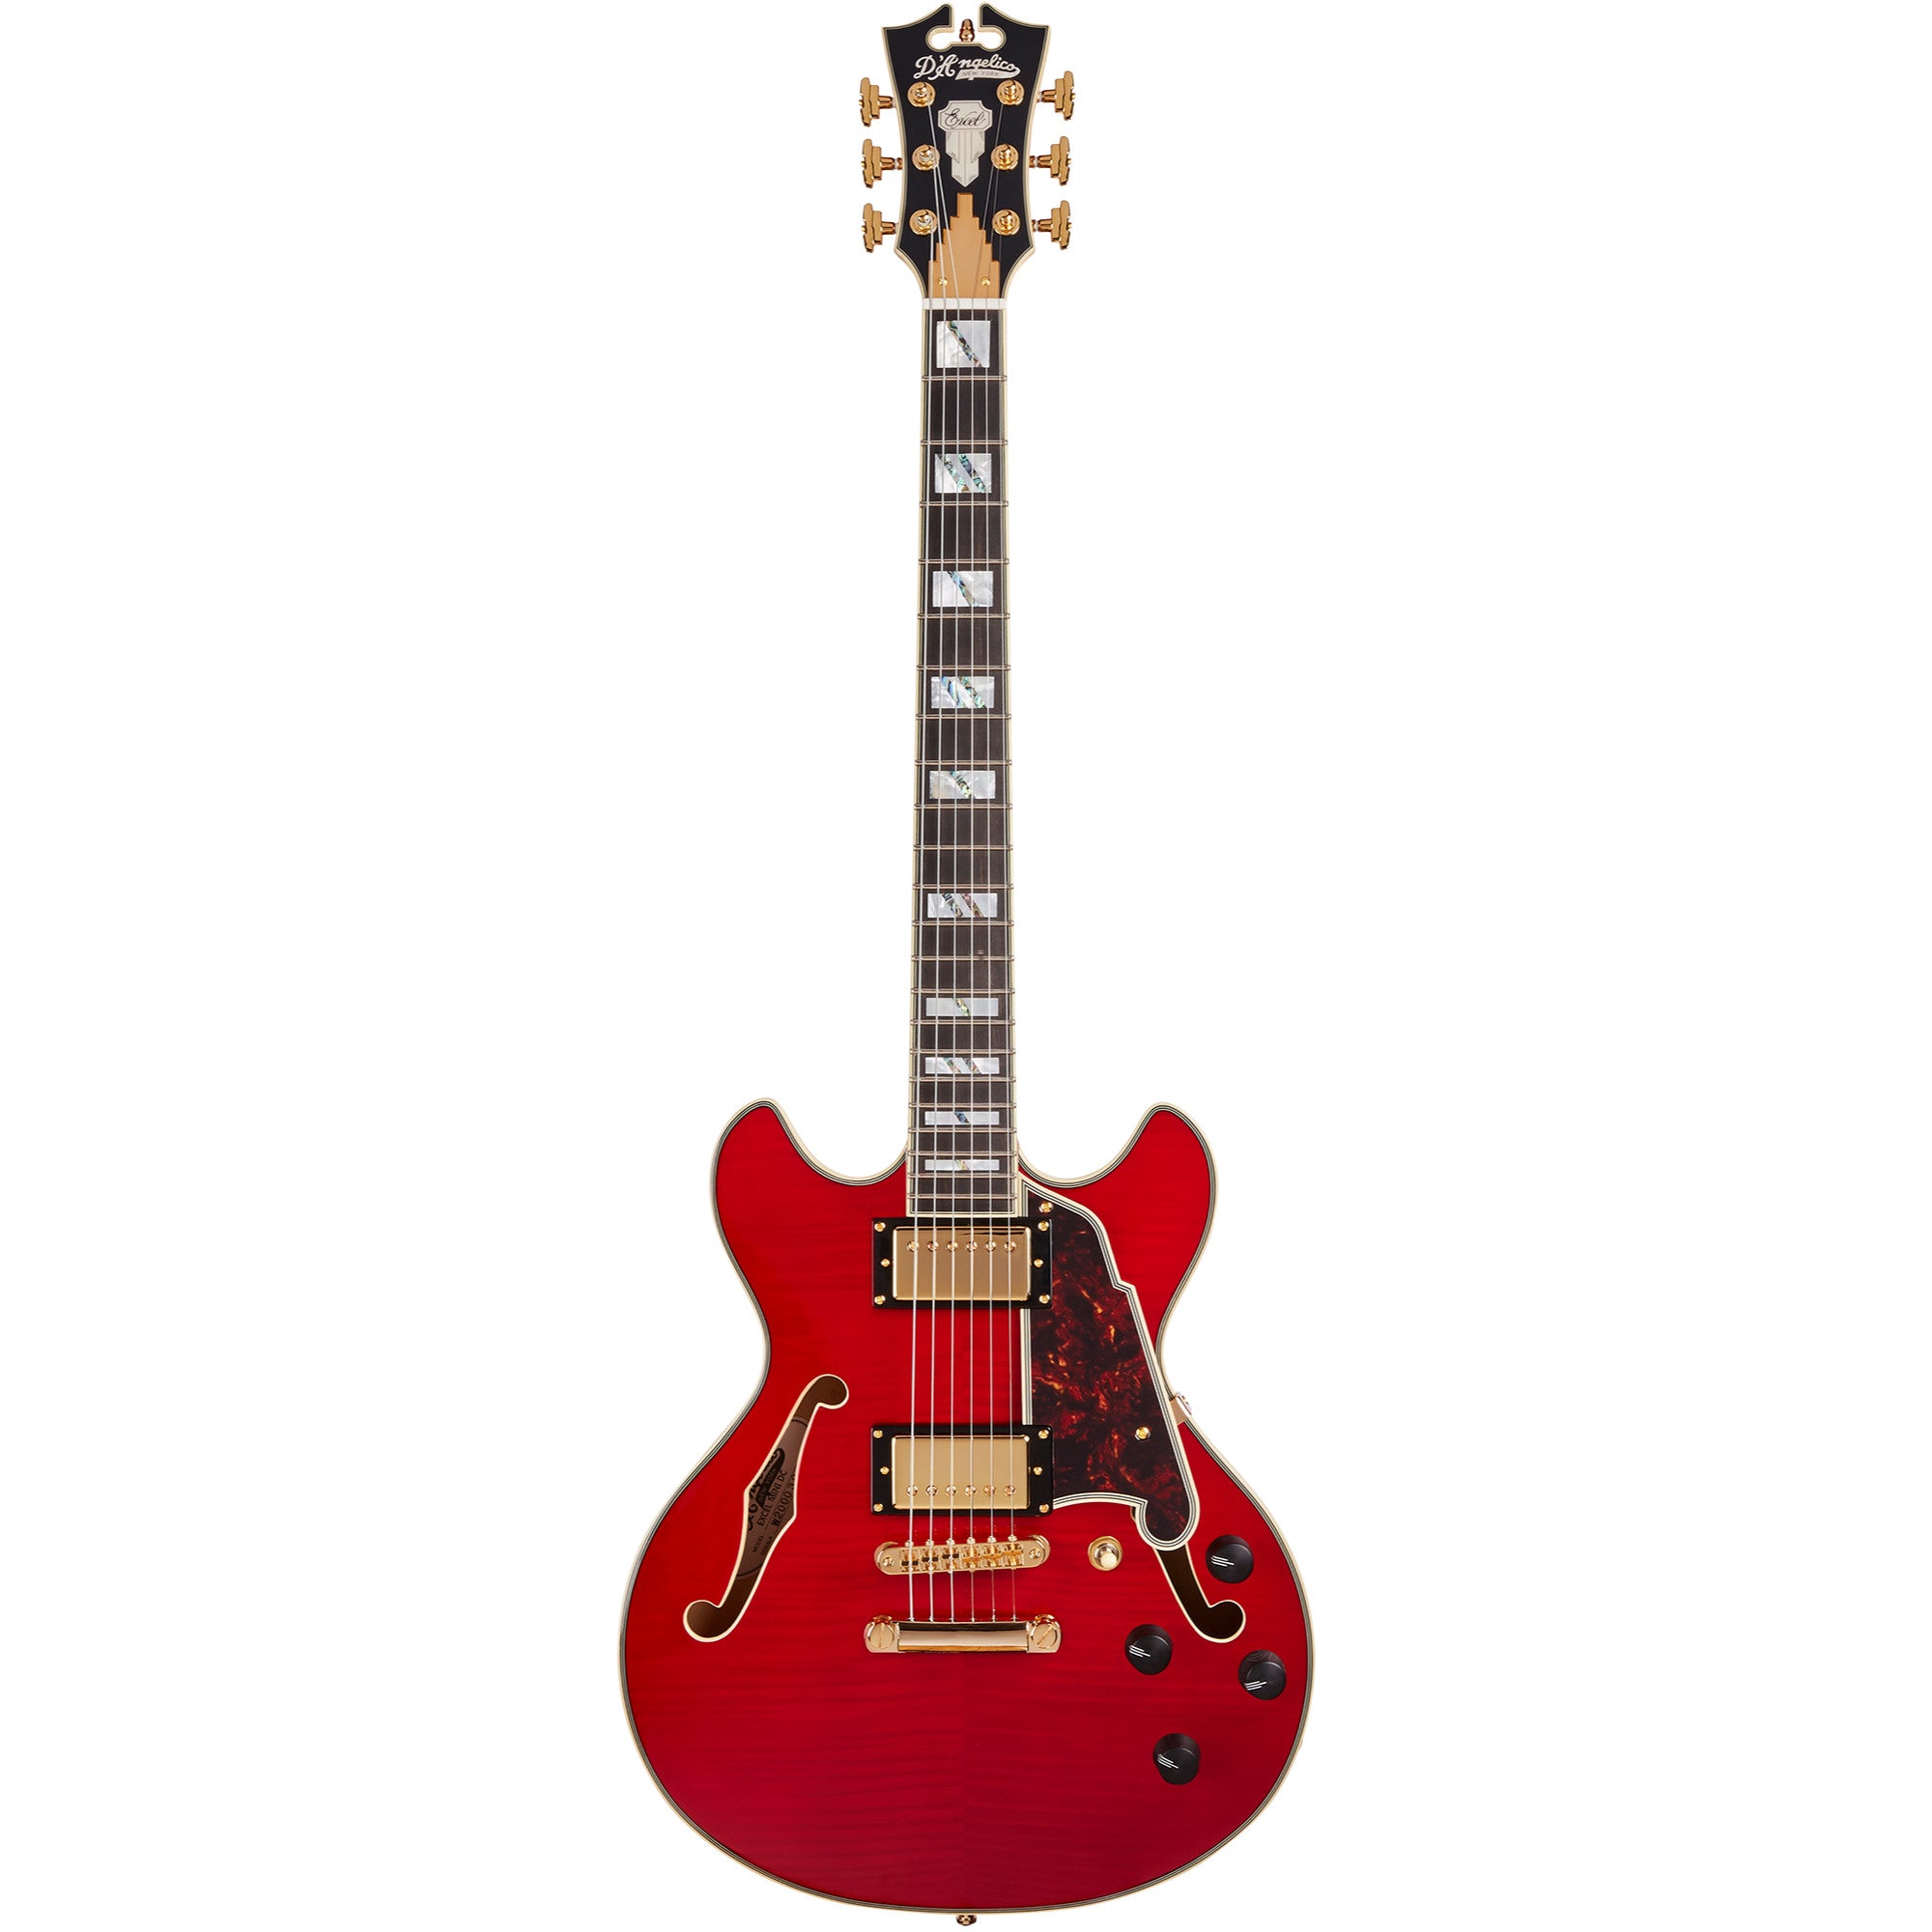 D'Angelico, D'Angelico Excel Mini Double Cutaway with Stop-Bar Tailpiece, Trans Cherry